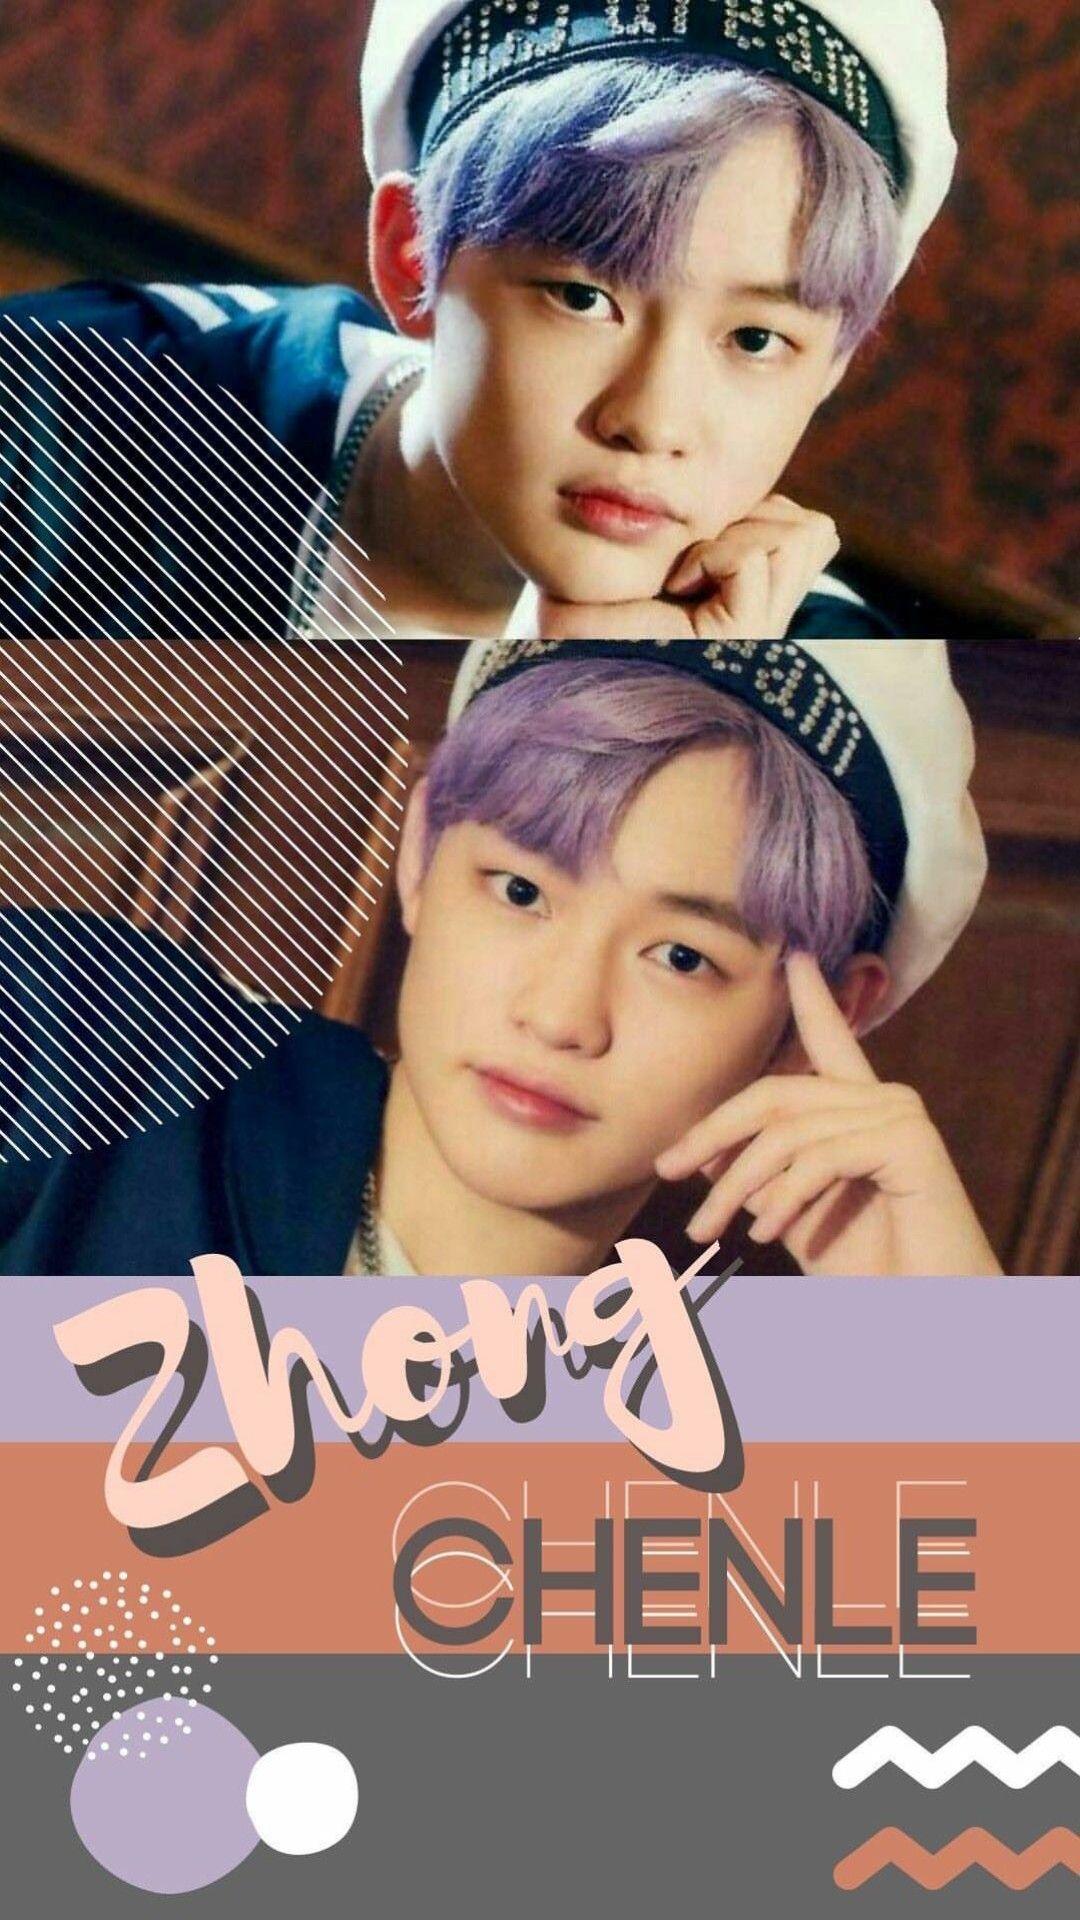 nct. Nct chenle, Nct, Nct dream